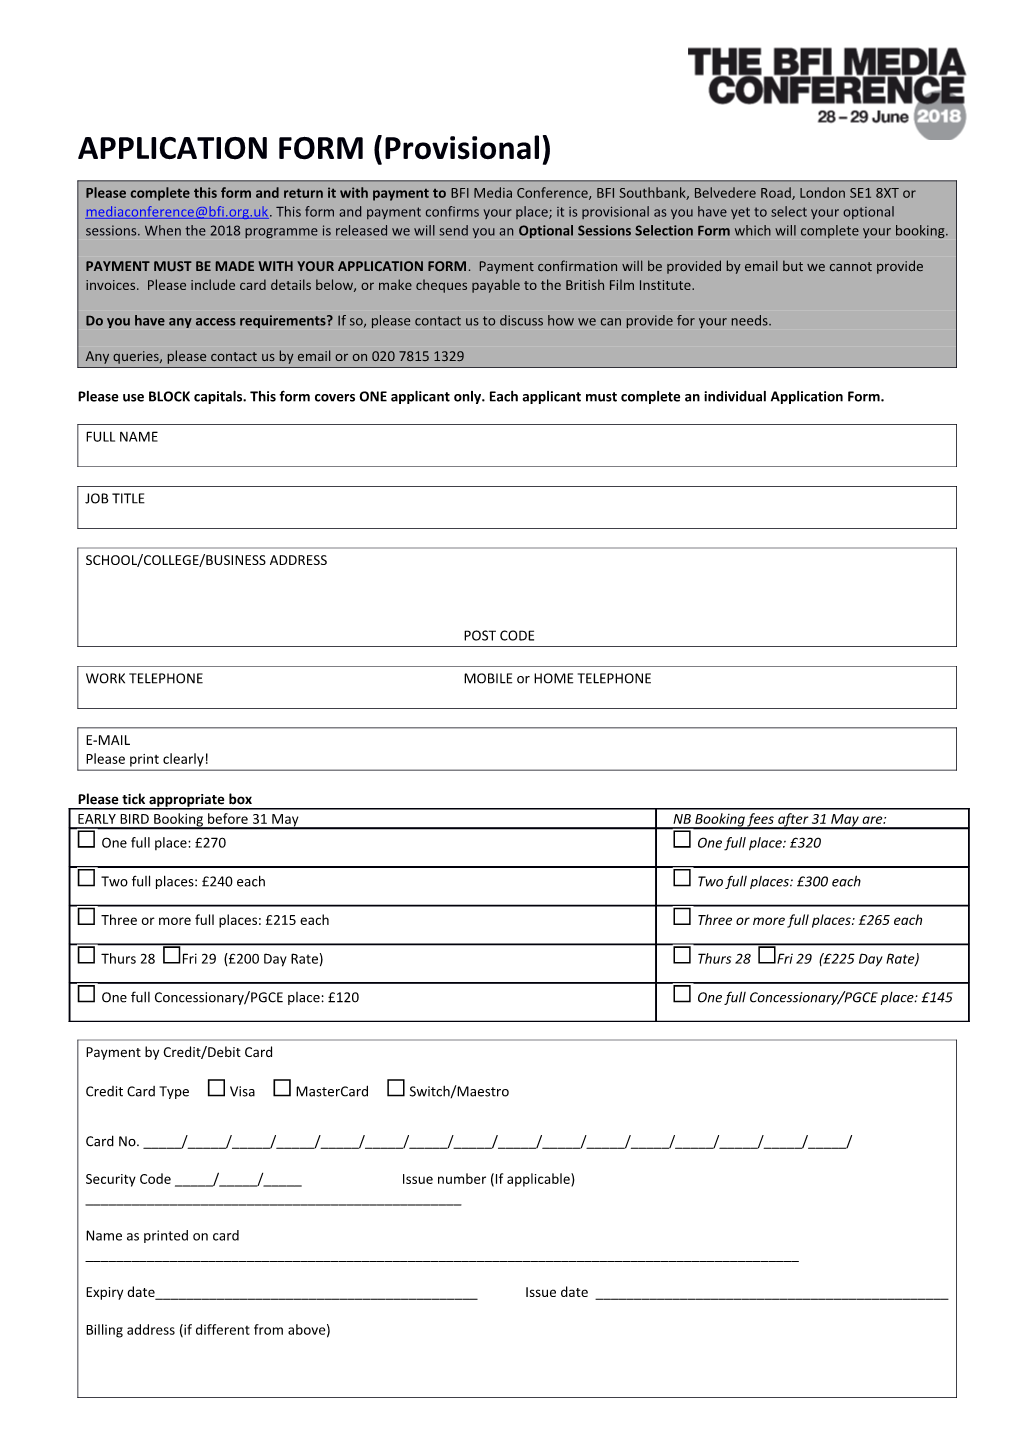 APPLICATION FORM (Provisional)